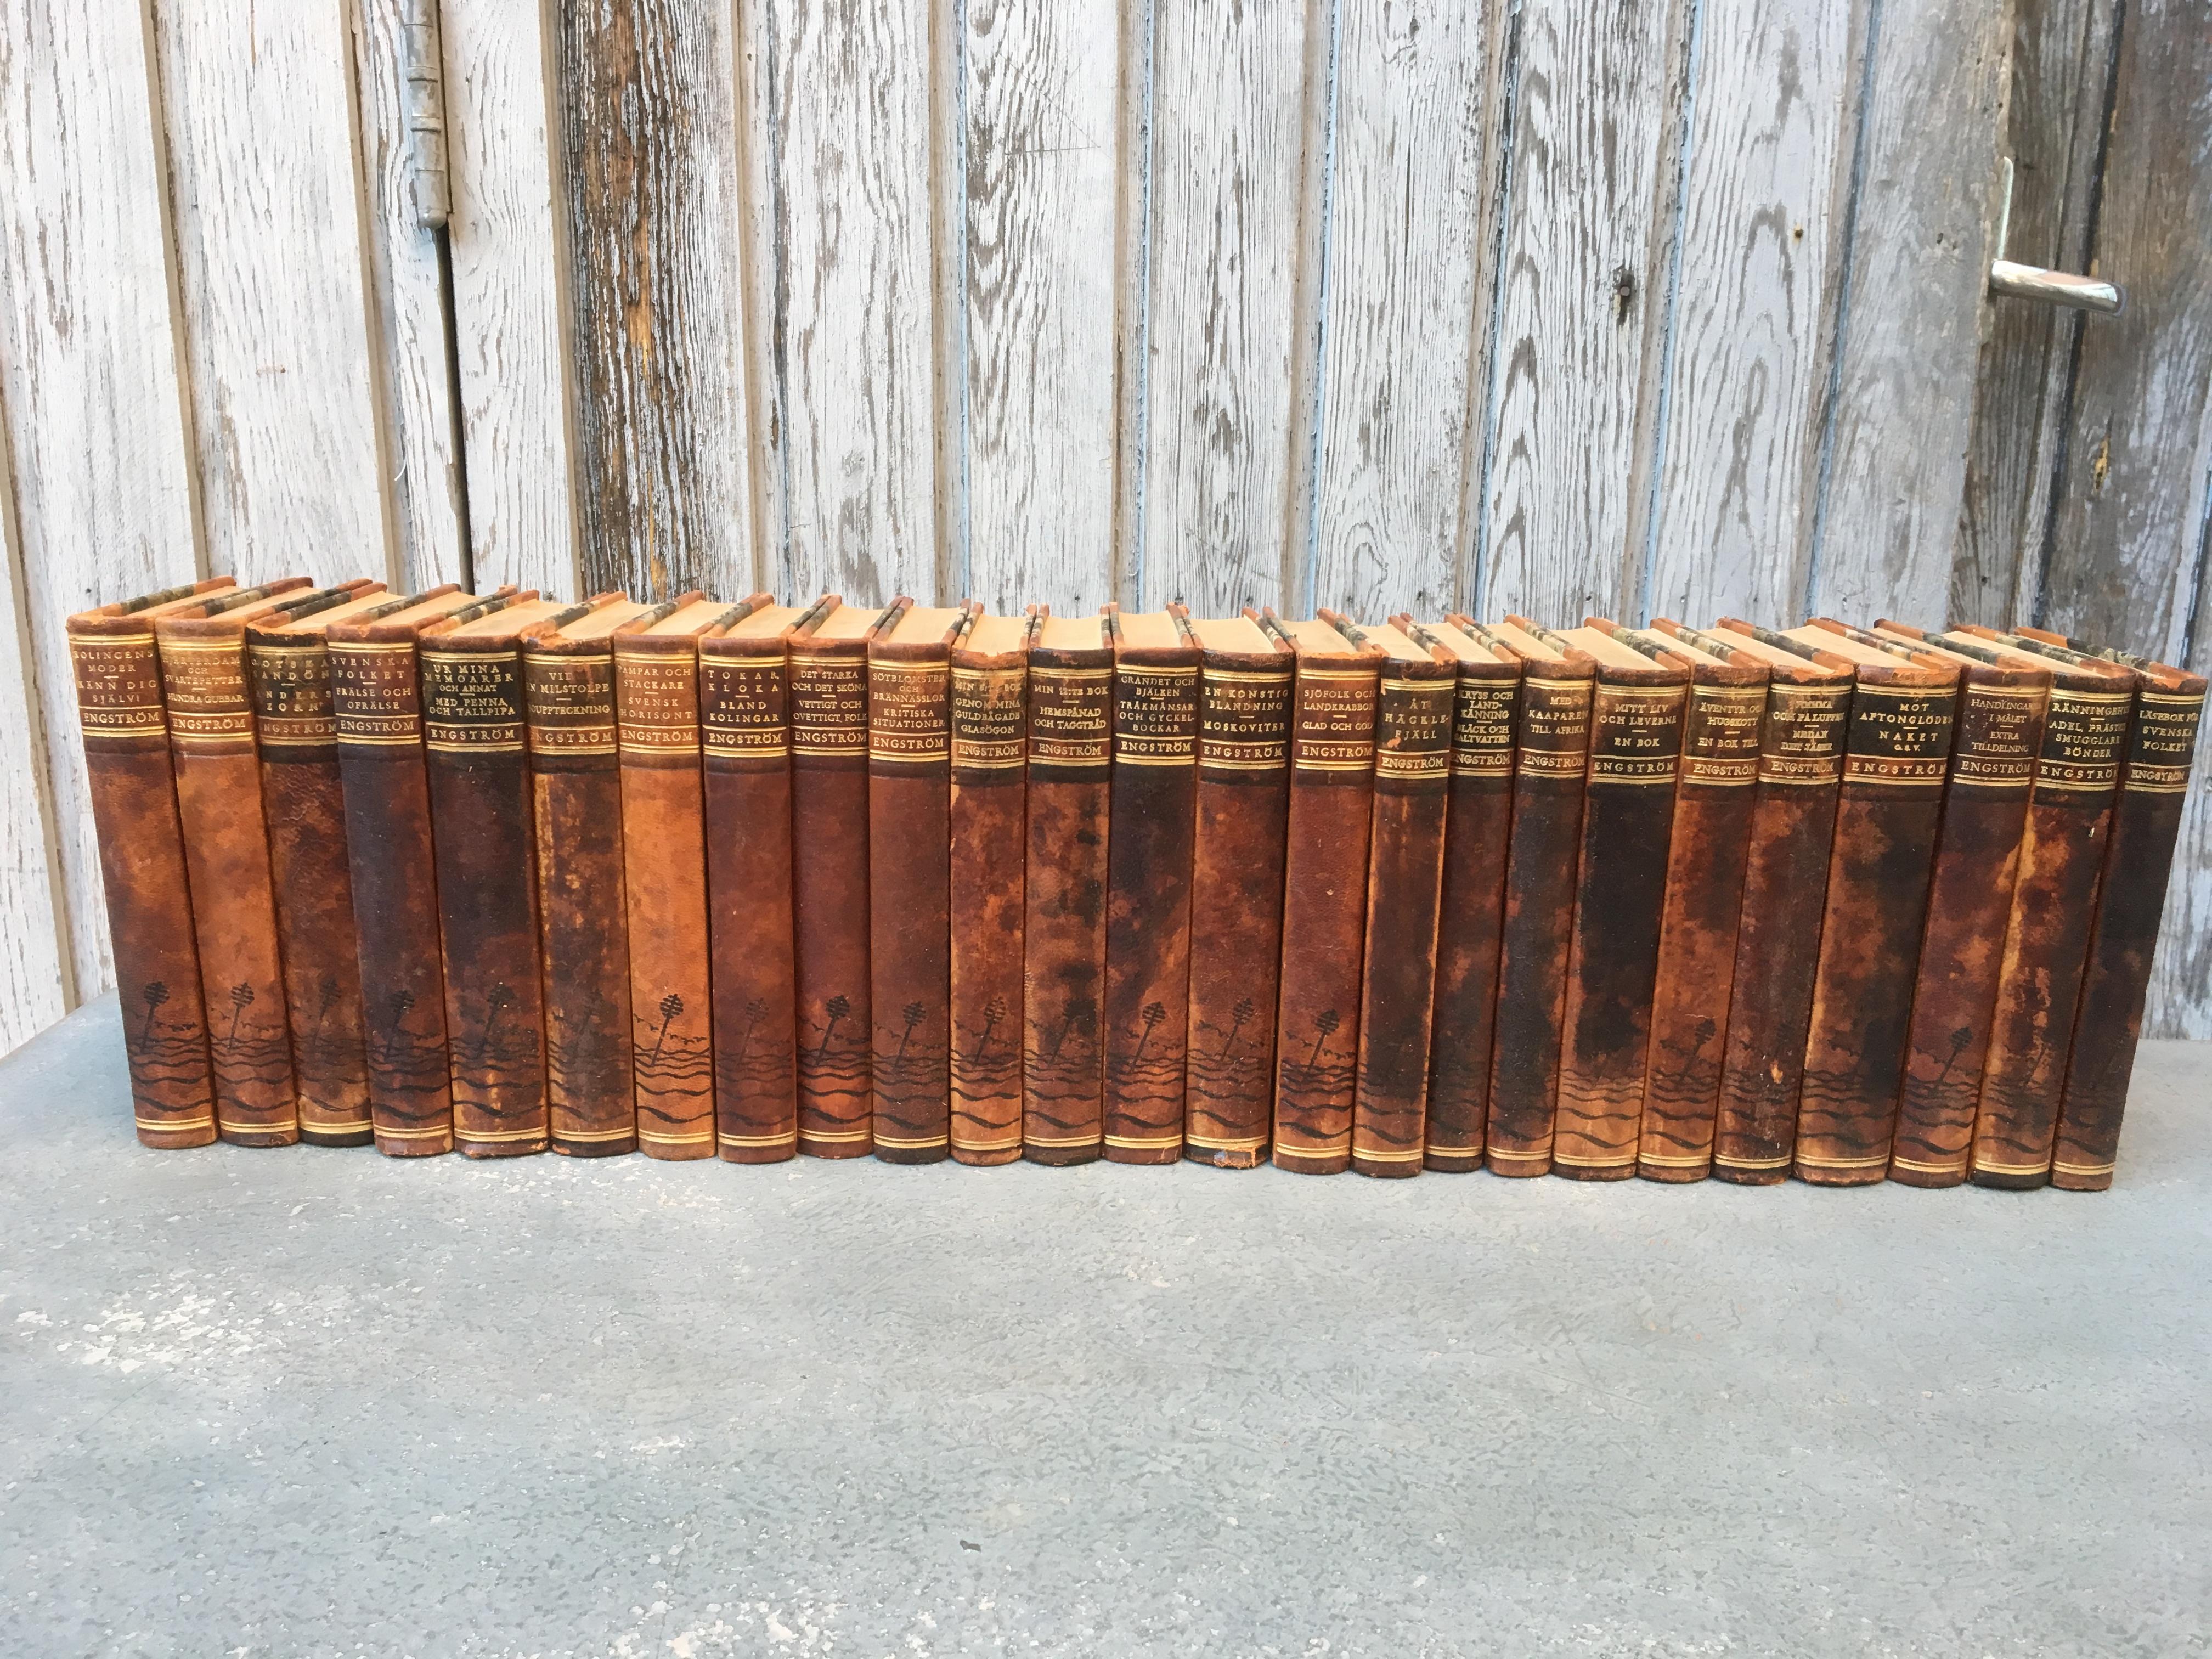 Set of 25 Swedish leather-bound library books, 1948.
Total length 28.7 inches
Thichness of books is btw 2.5 and 4 cm.